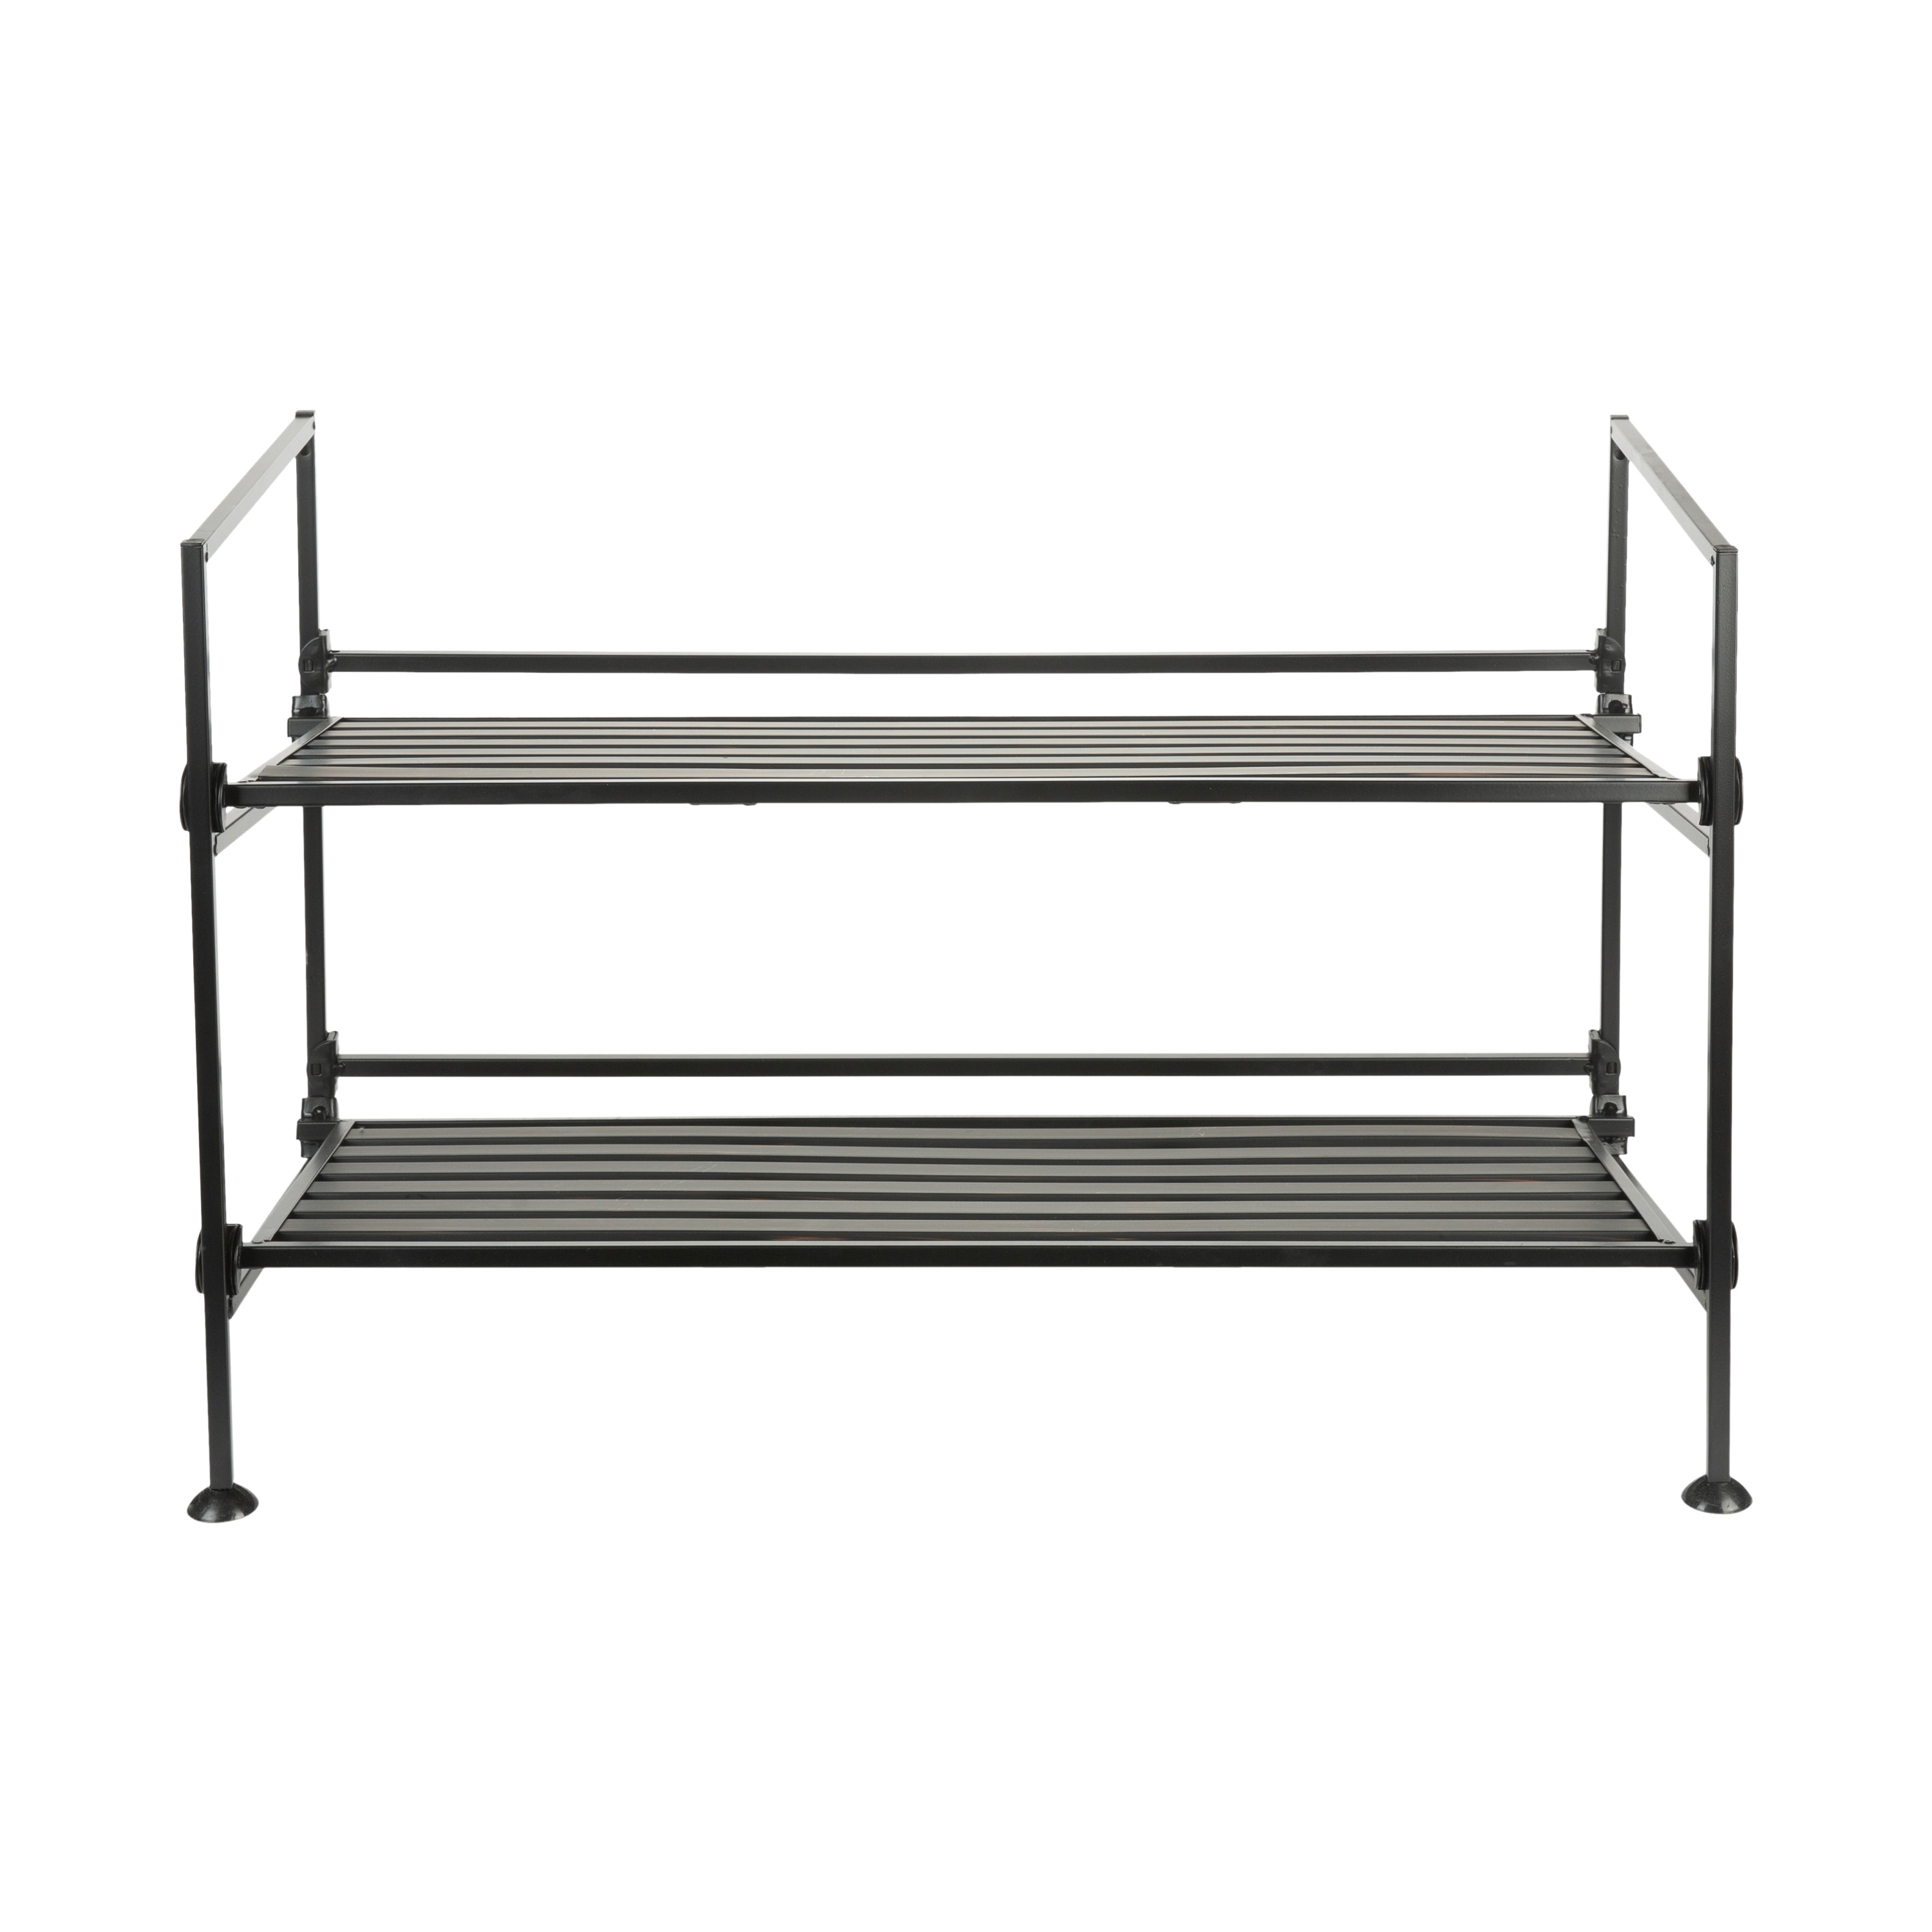 Auledio Shoe Rack, Stackable and Adjustable Multi-Function Wire